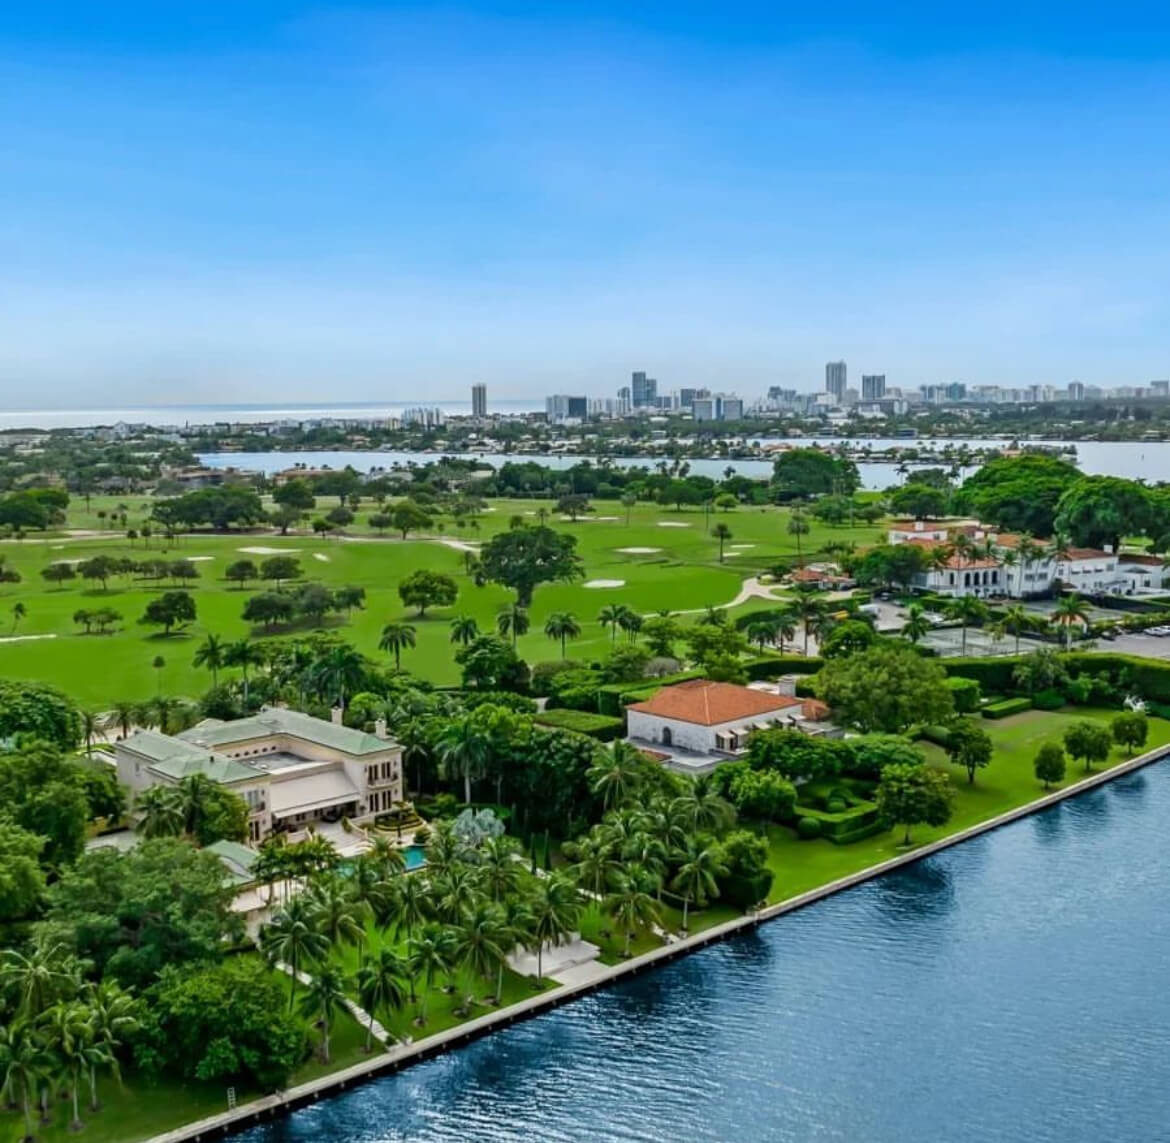 With both homes, he has spent a combined $147 million on luxury housing in the Florida area favored by high profile owners like Ivanka Trump and her husband Jared Kushner, Tom Brady and musician Julio Iglesias.